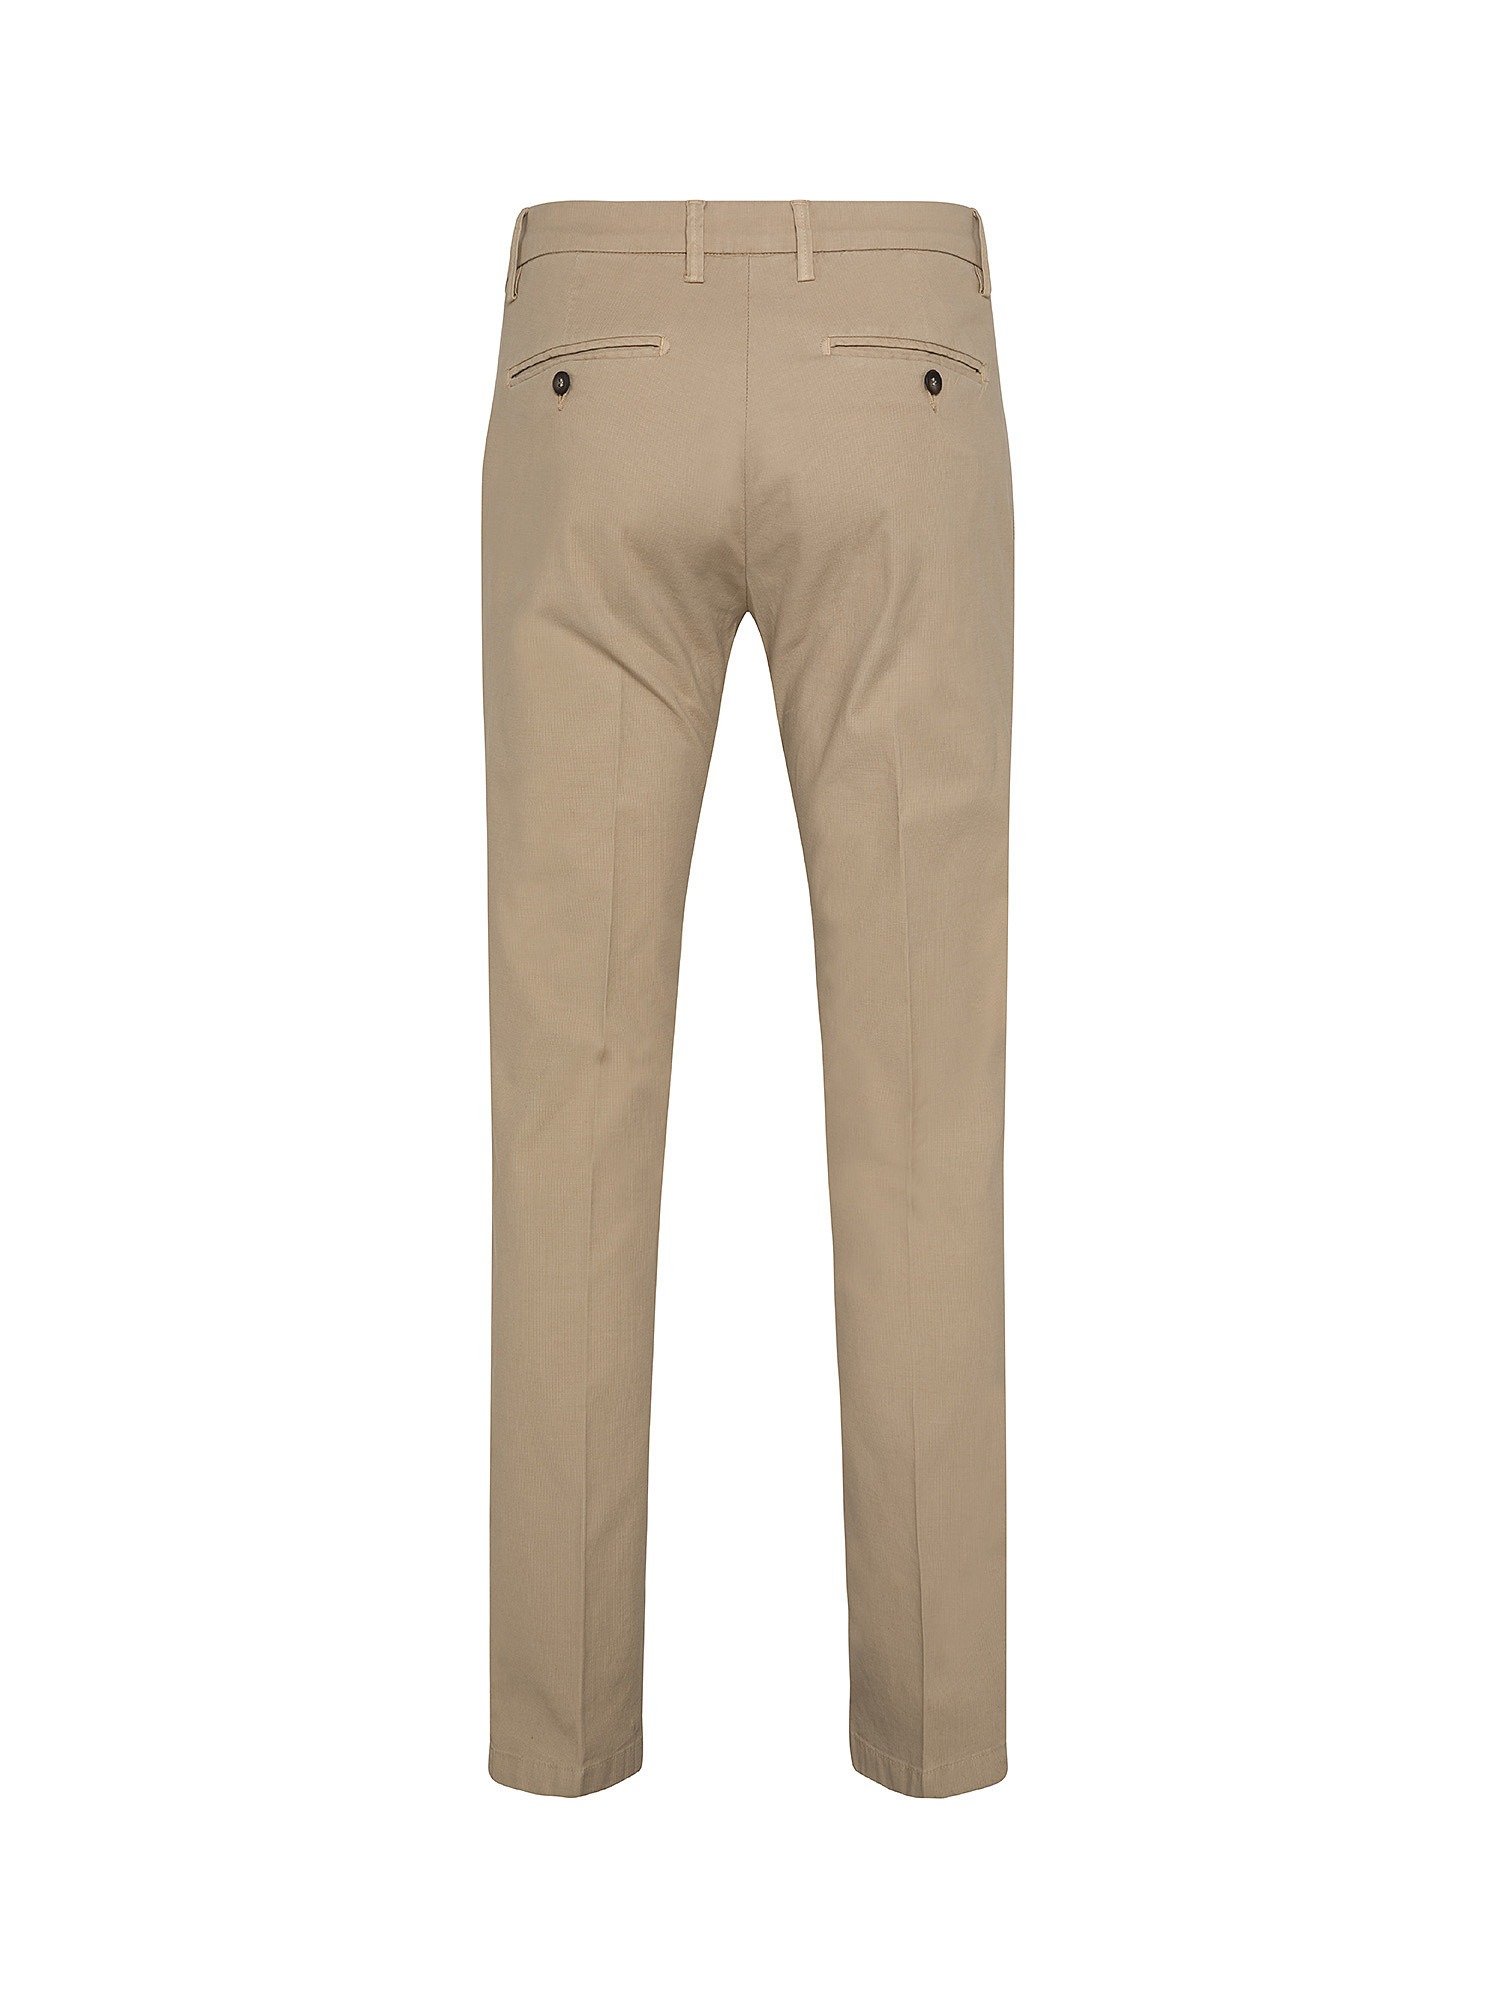 Chino trousers, Beige, large image number 1